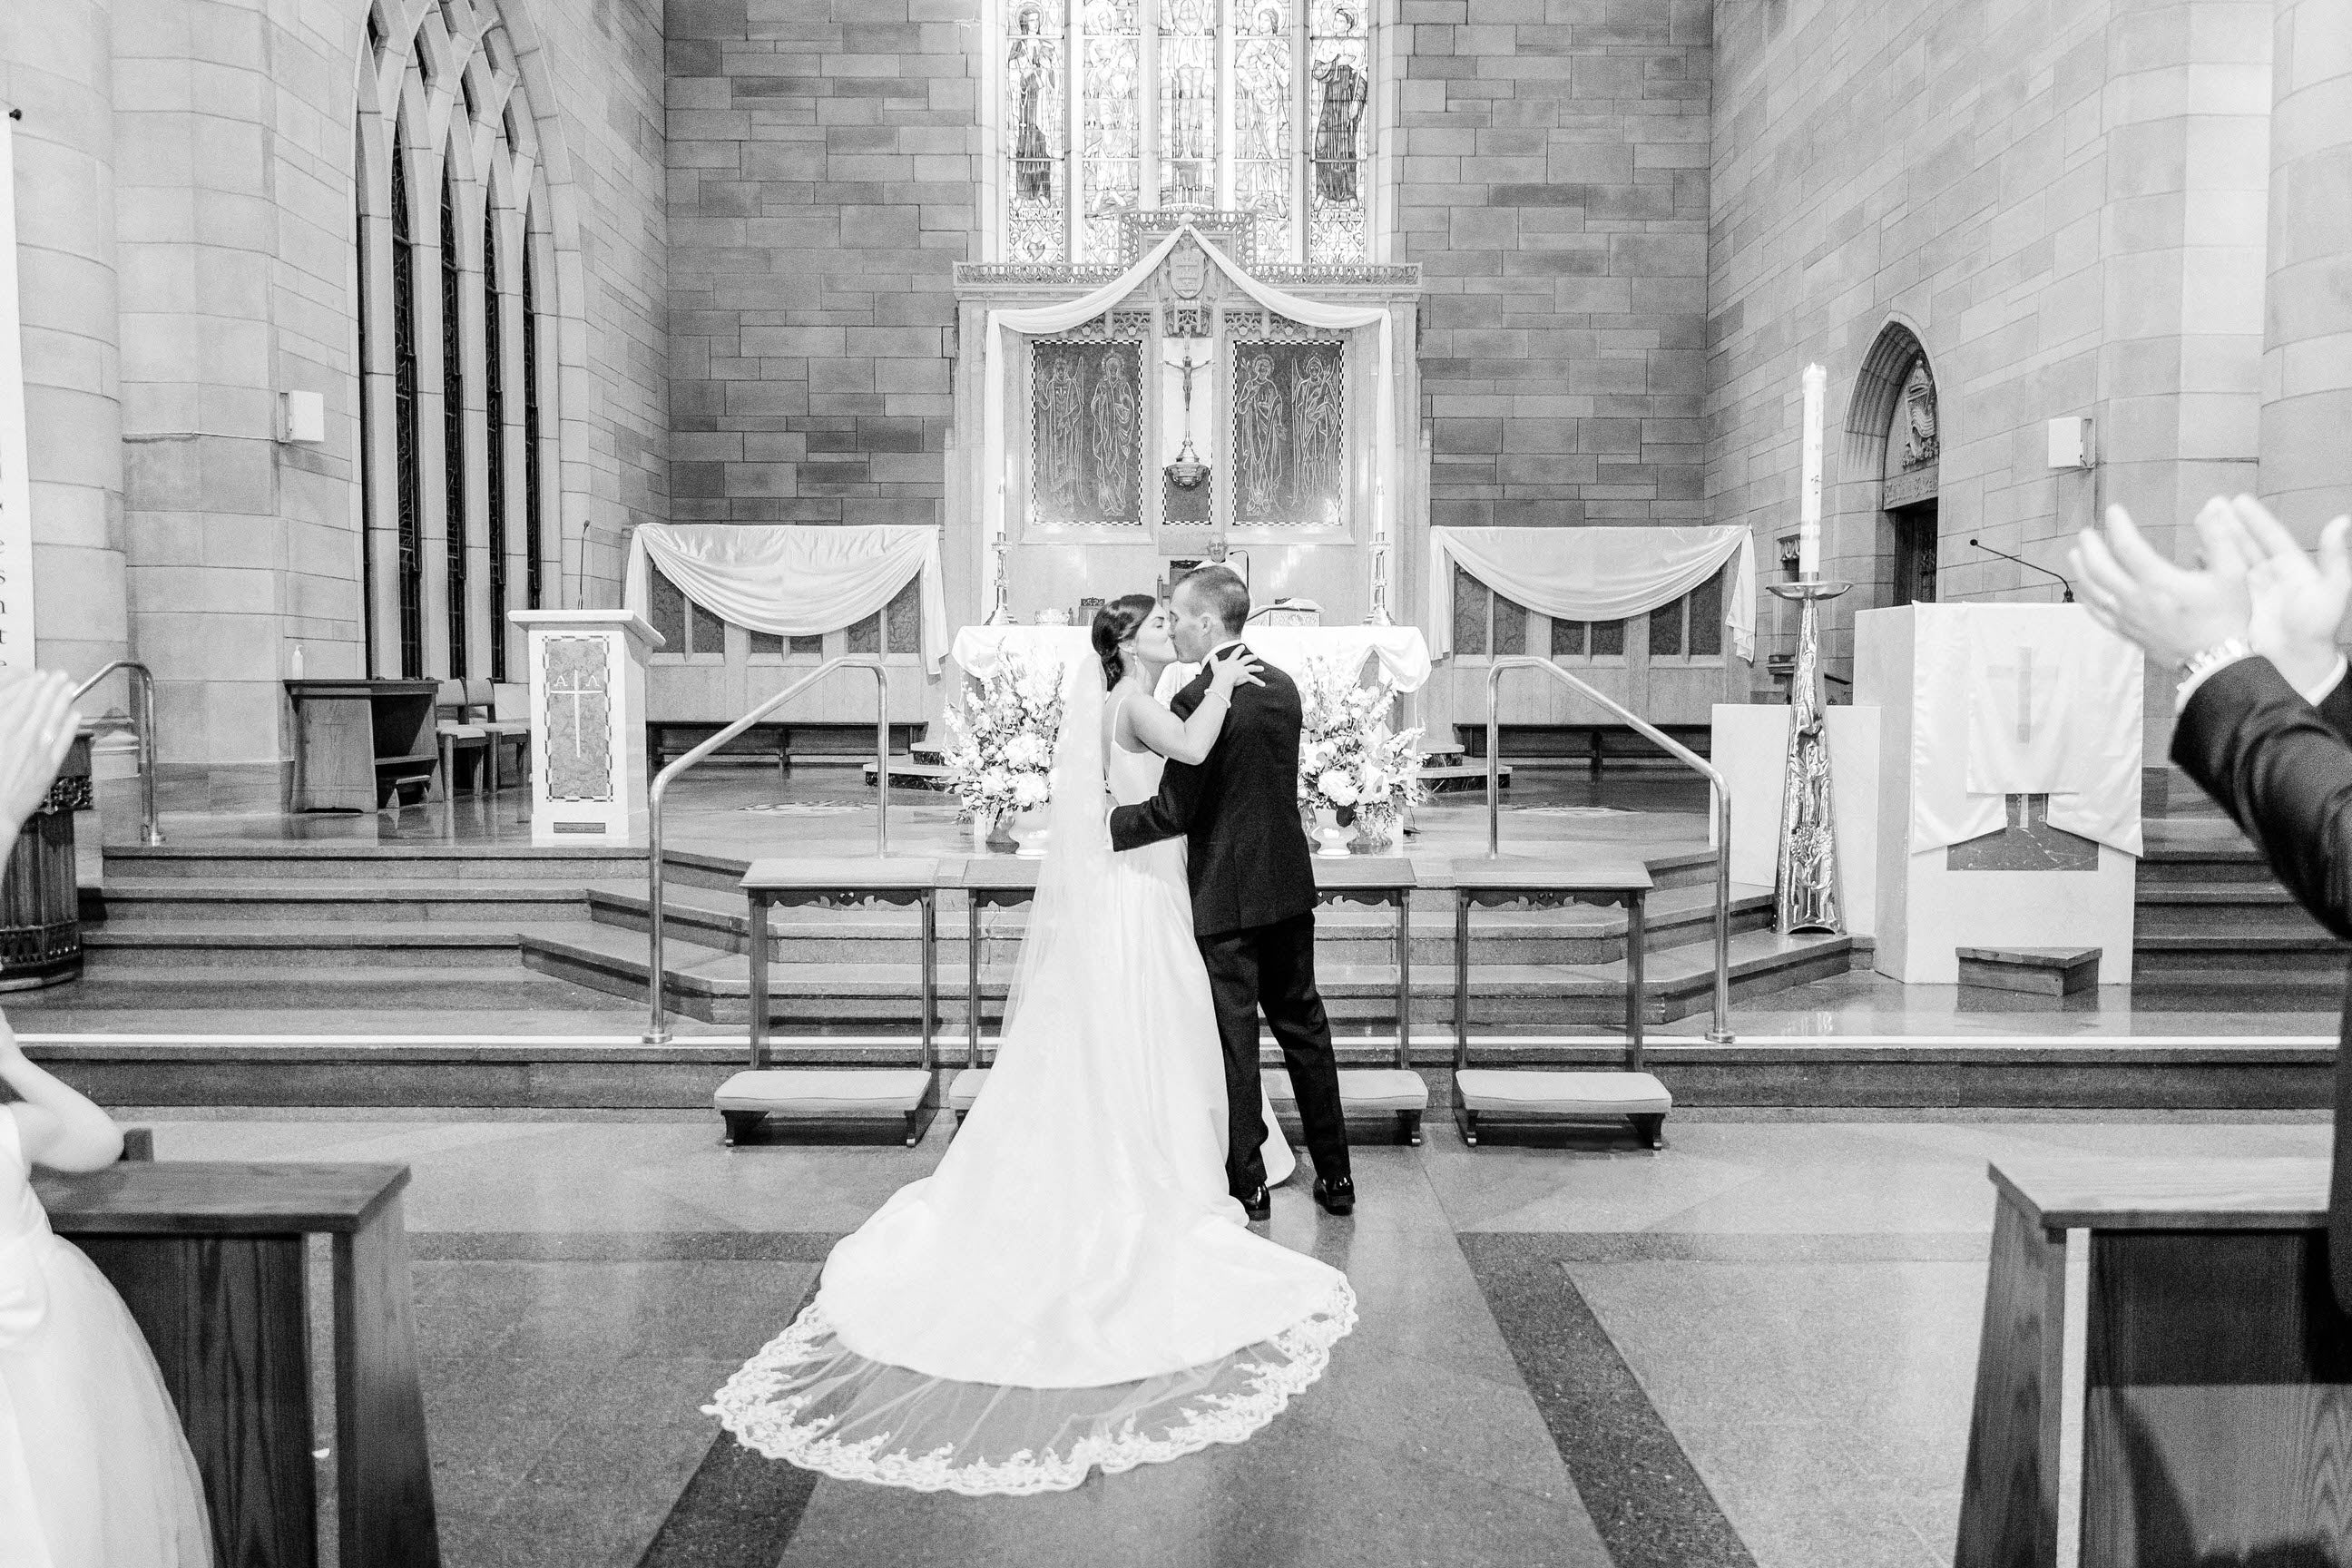 Thin Scalloped Lace Chapel or Cathedral Wedding Veil